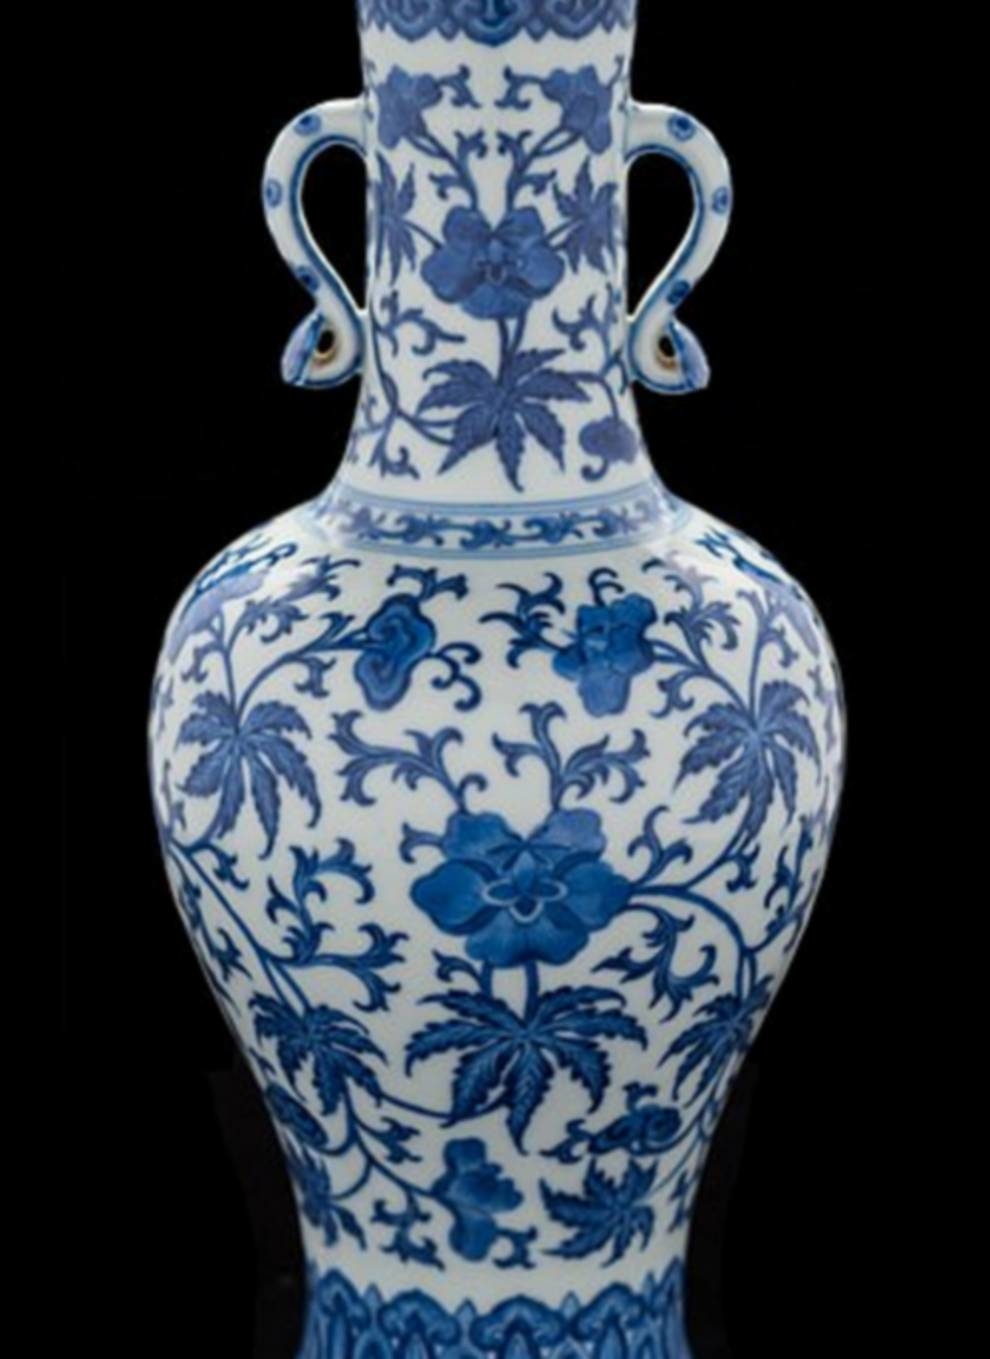 For 20 years, this Chinese vase lay in the attic until it was shown to the experts